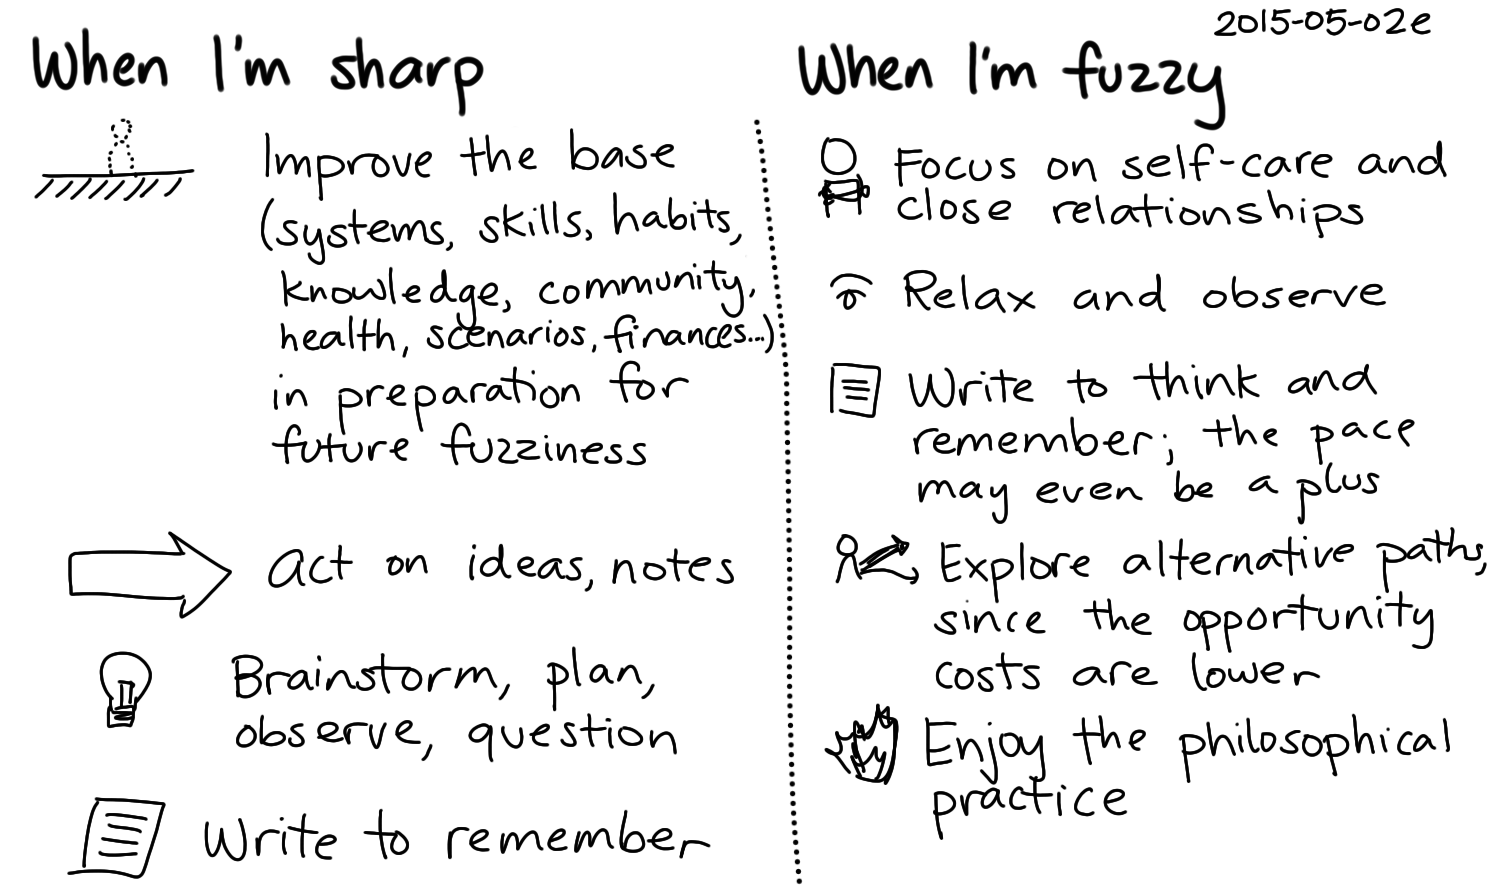 2015-05-02e When I'm sharp, when I'm fuzzy -- index card #fuzzy.png